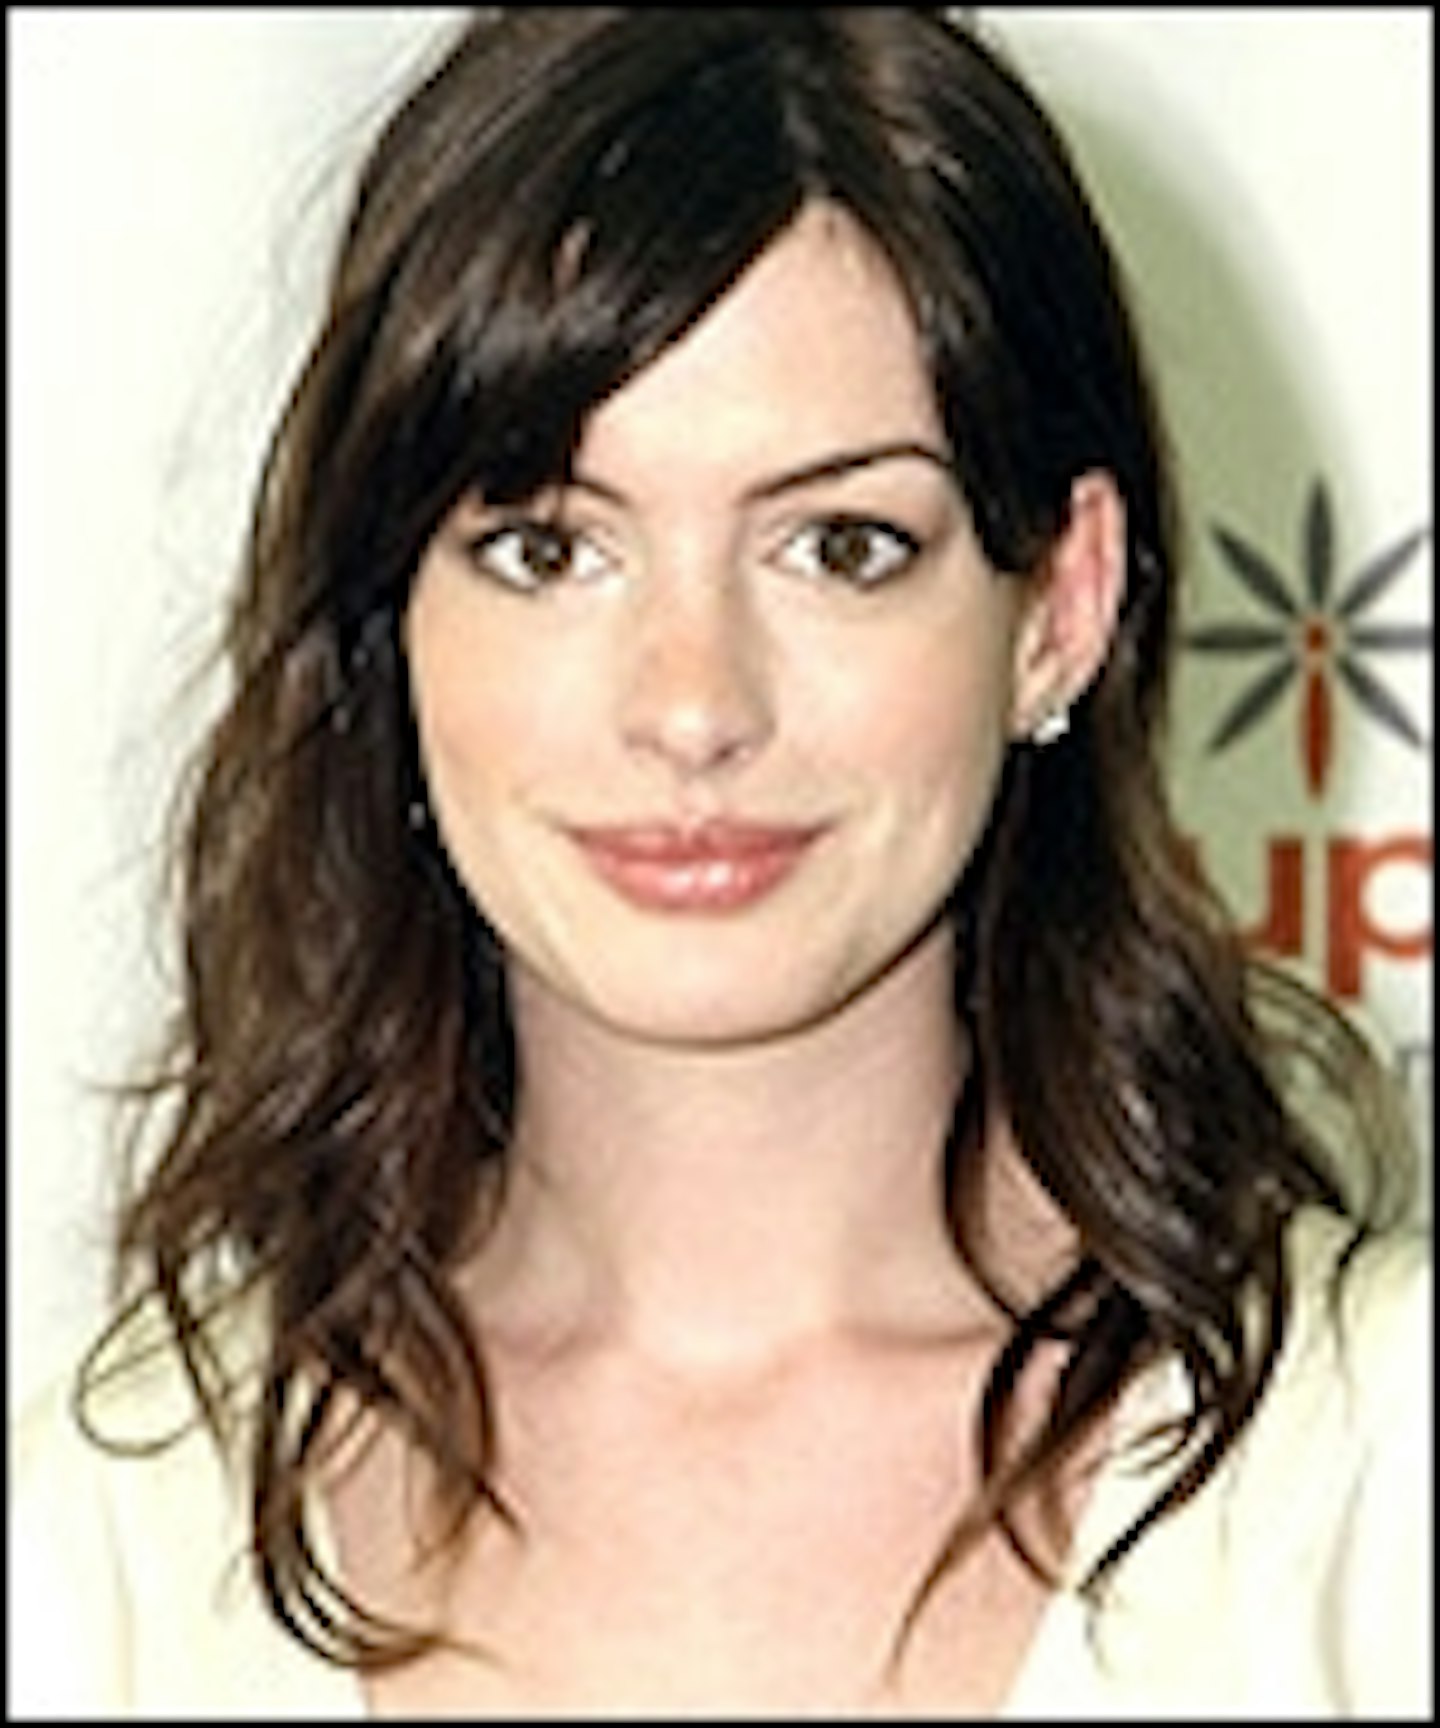 Anne Hathaway In Talks For Rock Of Ages